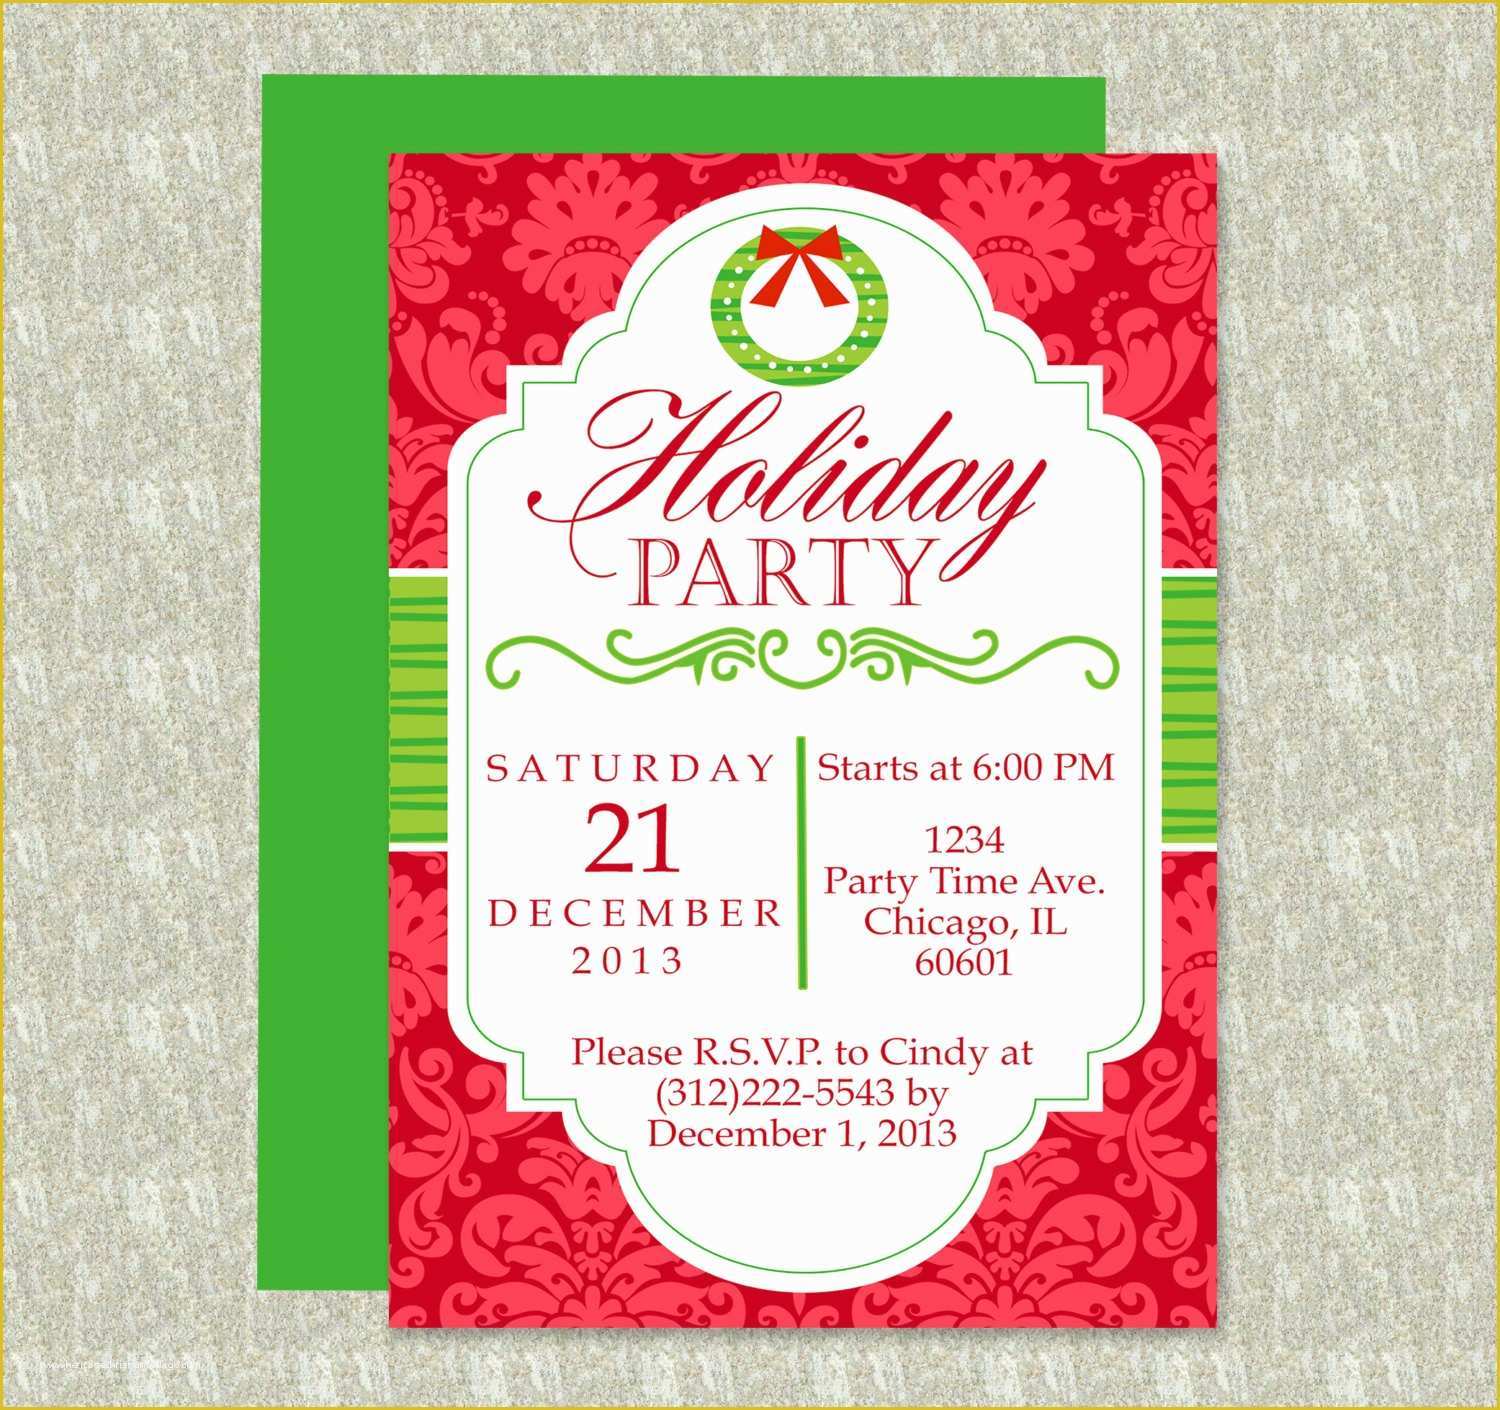 Office Christmas Party Flyer Templates Free Of Holiday Party Invitation Editable Template Microsoft Word